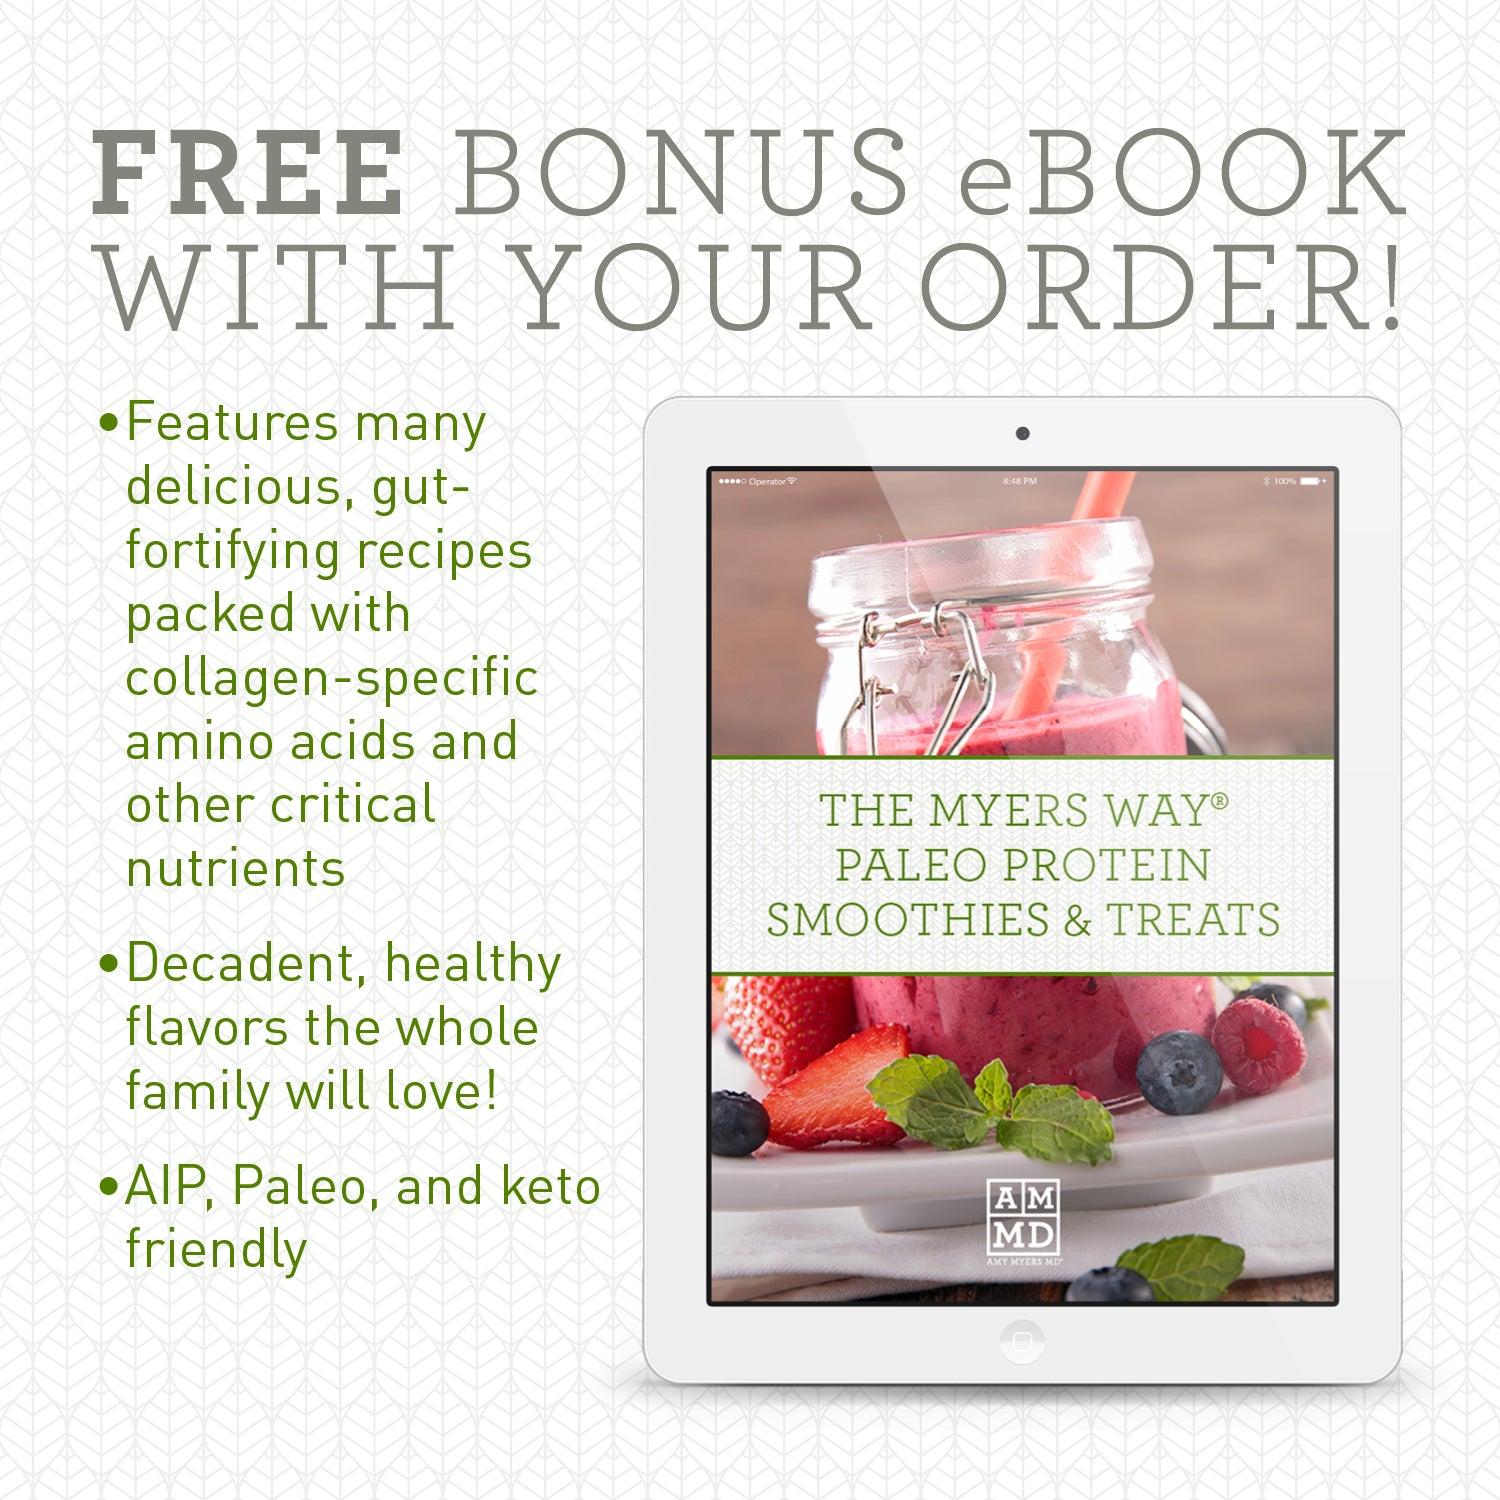 Free bonus ebook with your order! Features many delicious, gut-fortifying recipes packed with collagen-specific amino acids and other critical nutrients. Decadent, health flavors the whole family will love! AIP, Paleo, and keto friendly.